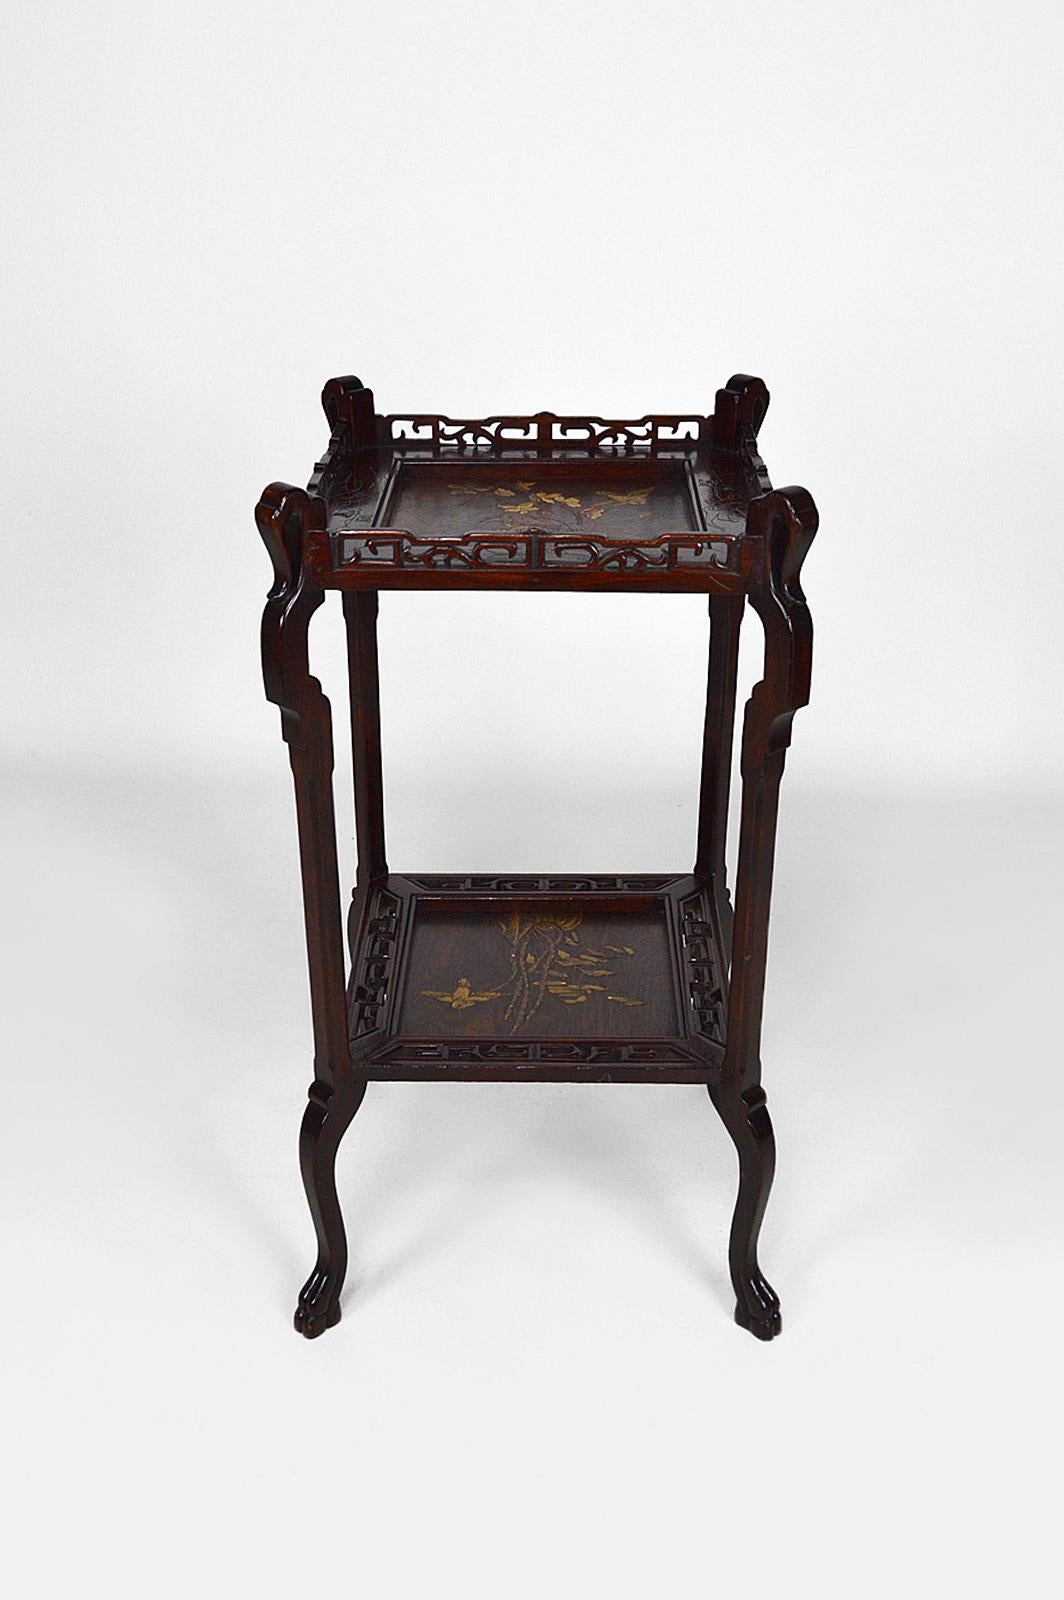 Superb pedestal table / gueridon / side table in carved wood whose feet end in hooves.
Presence of 2 lacquered Asian-inspired trays with animal and plant scenes: birds, insects, flowers...

In excellent condition, restored.
Art Nouveau Japonism,